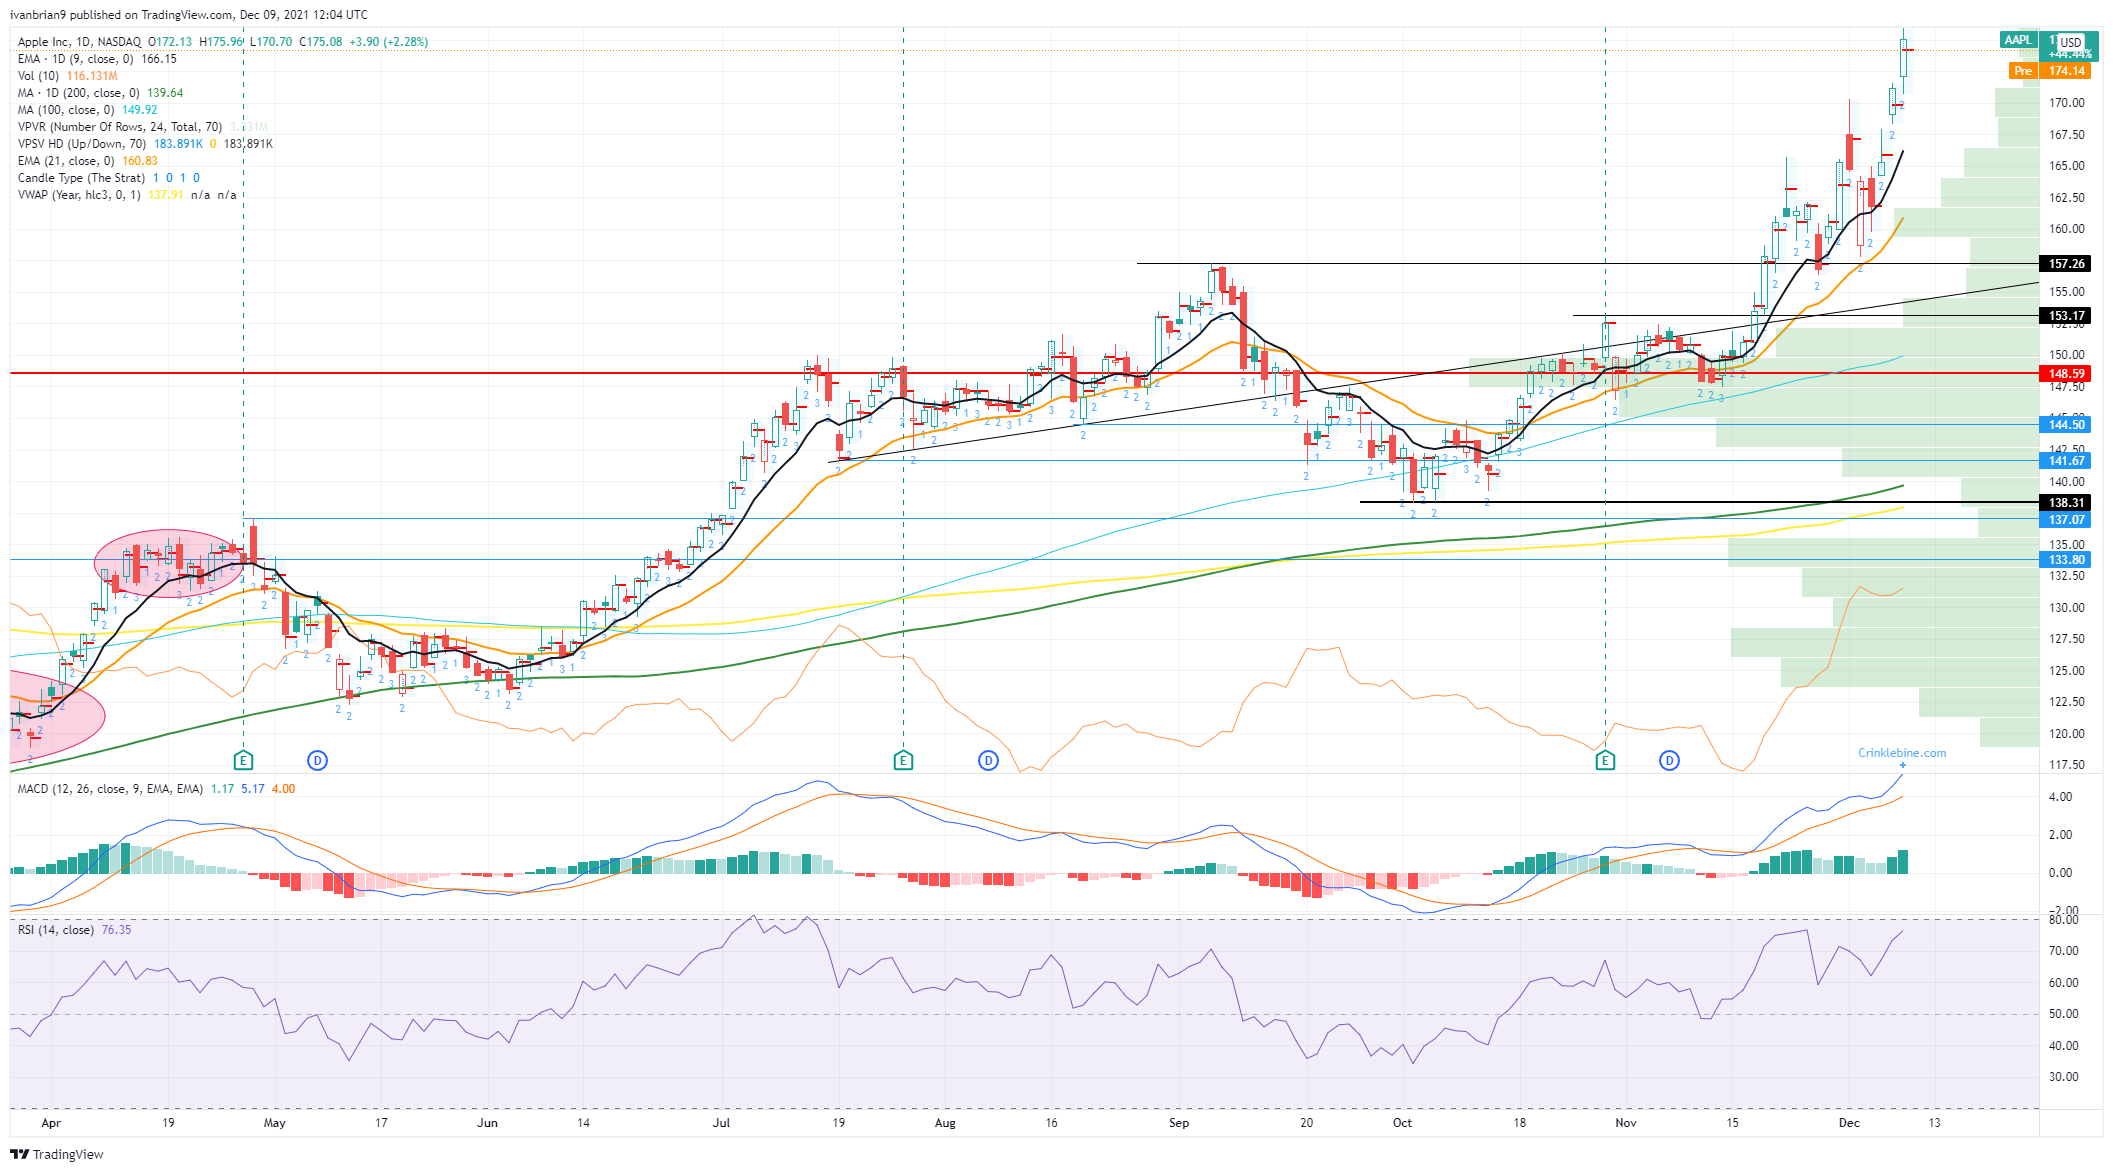 Apple (AAPL) Stock Price and Forecast: Can Apple take a bite out of $200 before year end? - 2